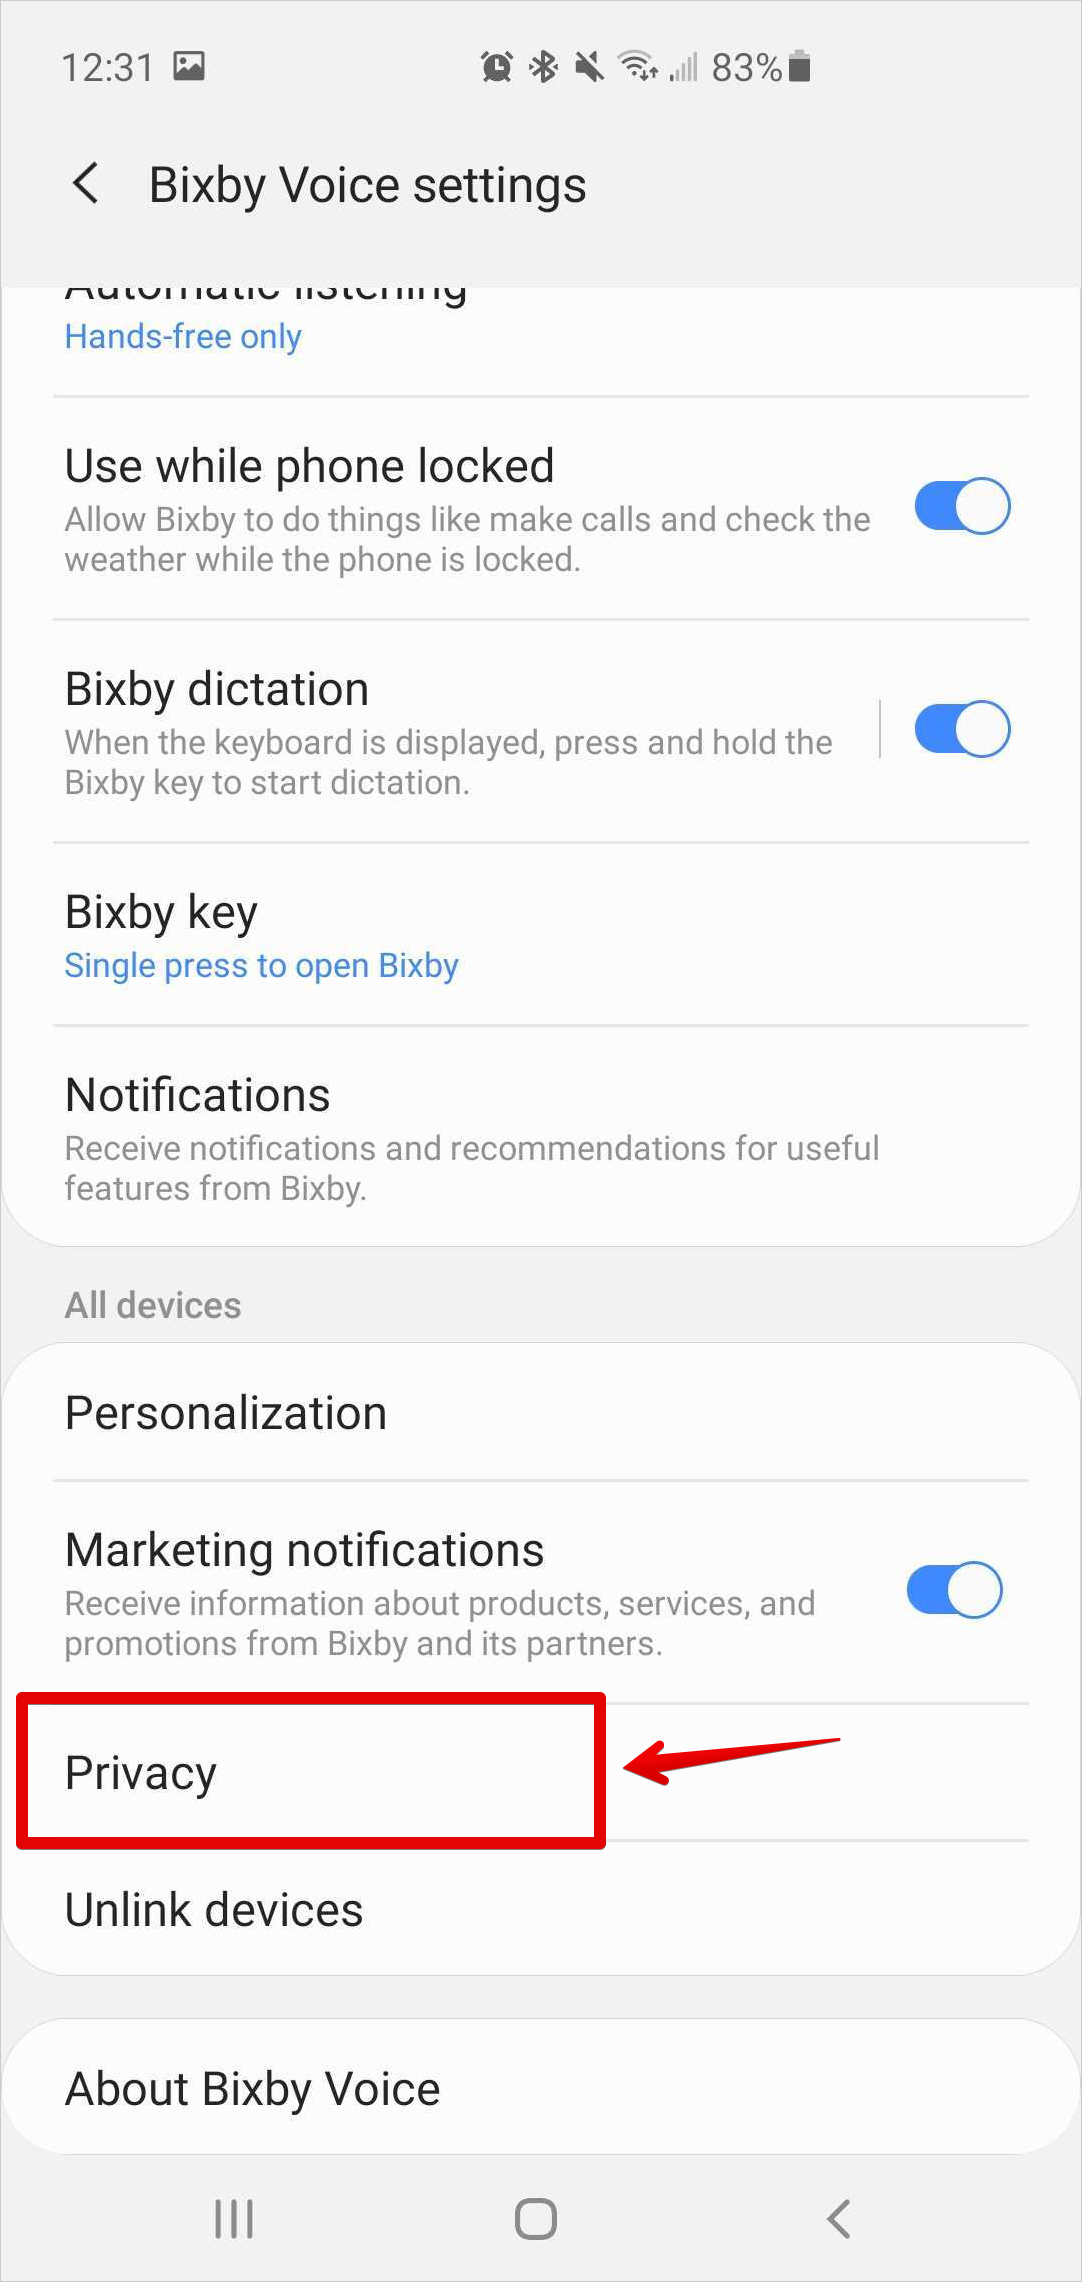 The Privacy option under All devices on the Bixby Voice Settings screen